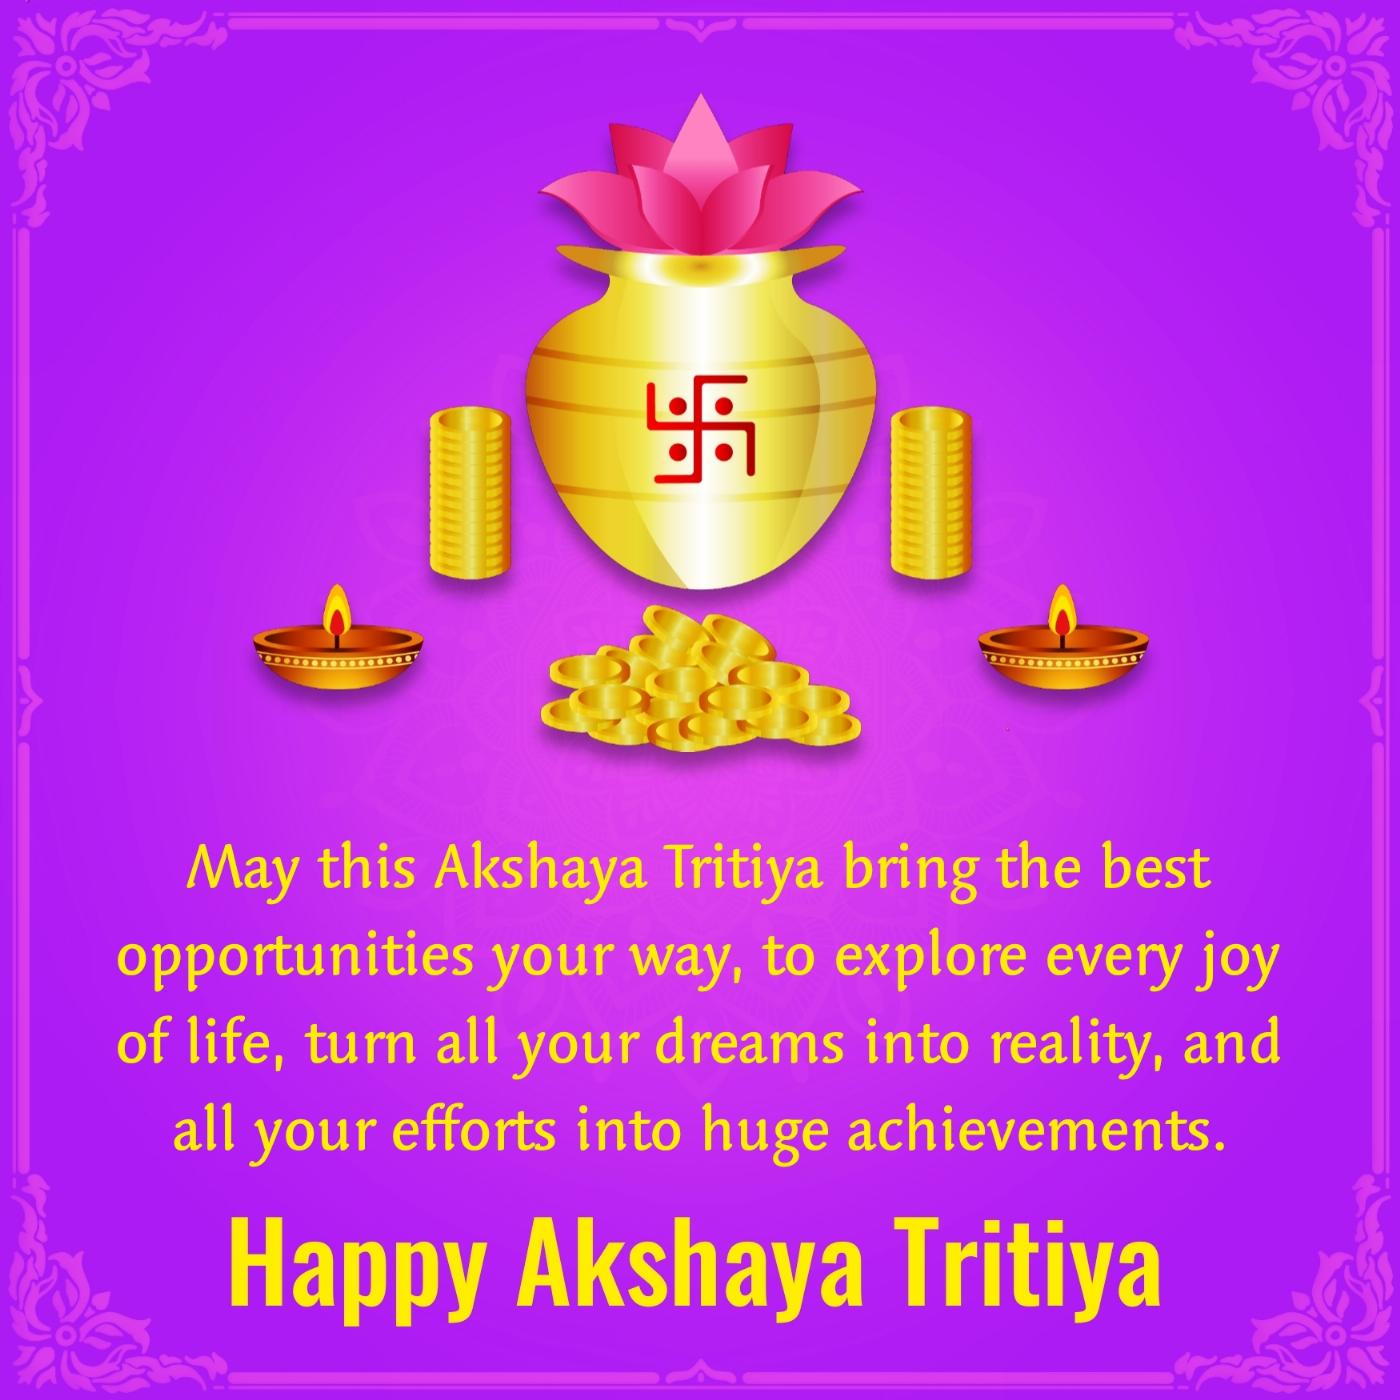 May this Akshaya Tritiya bring the best opportunities your way to explore every joy of life